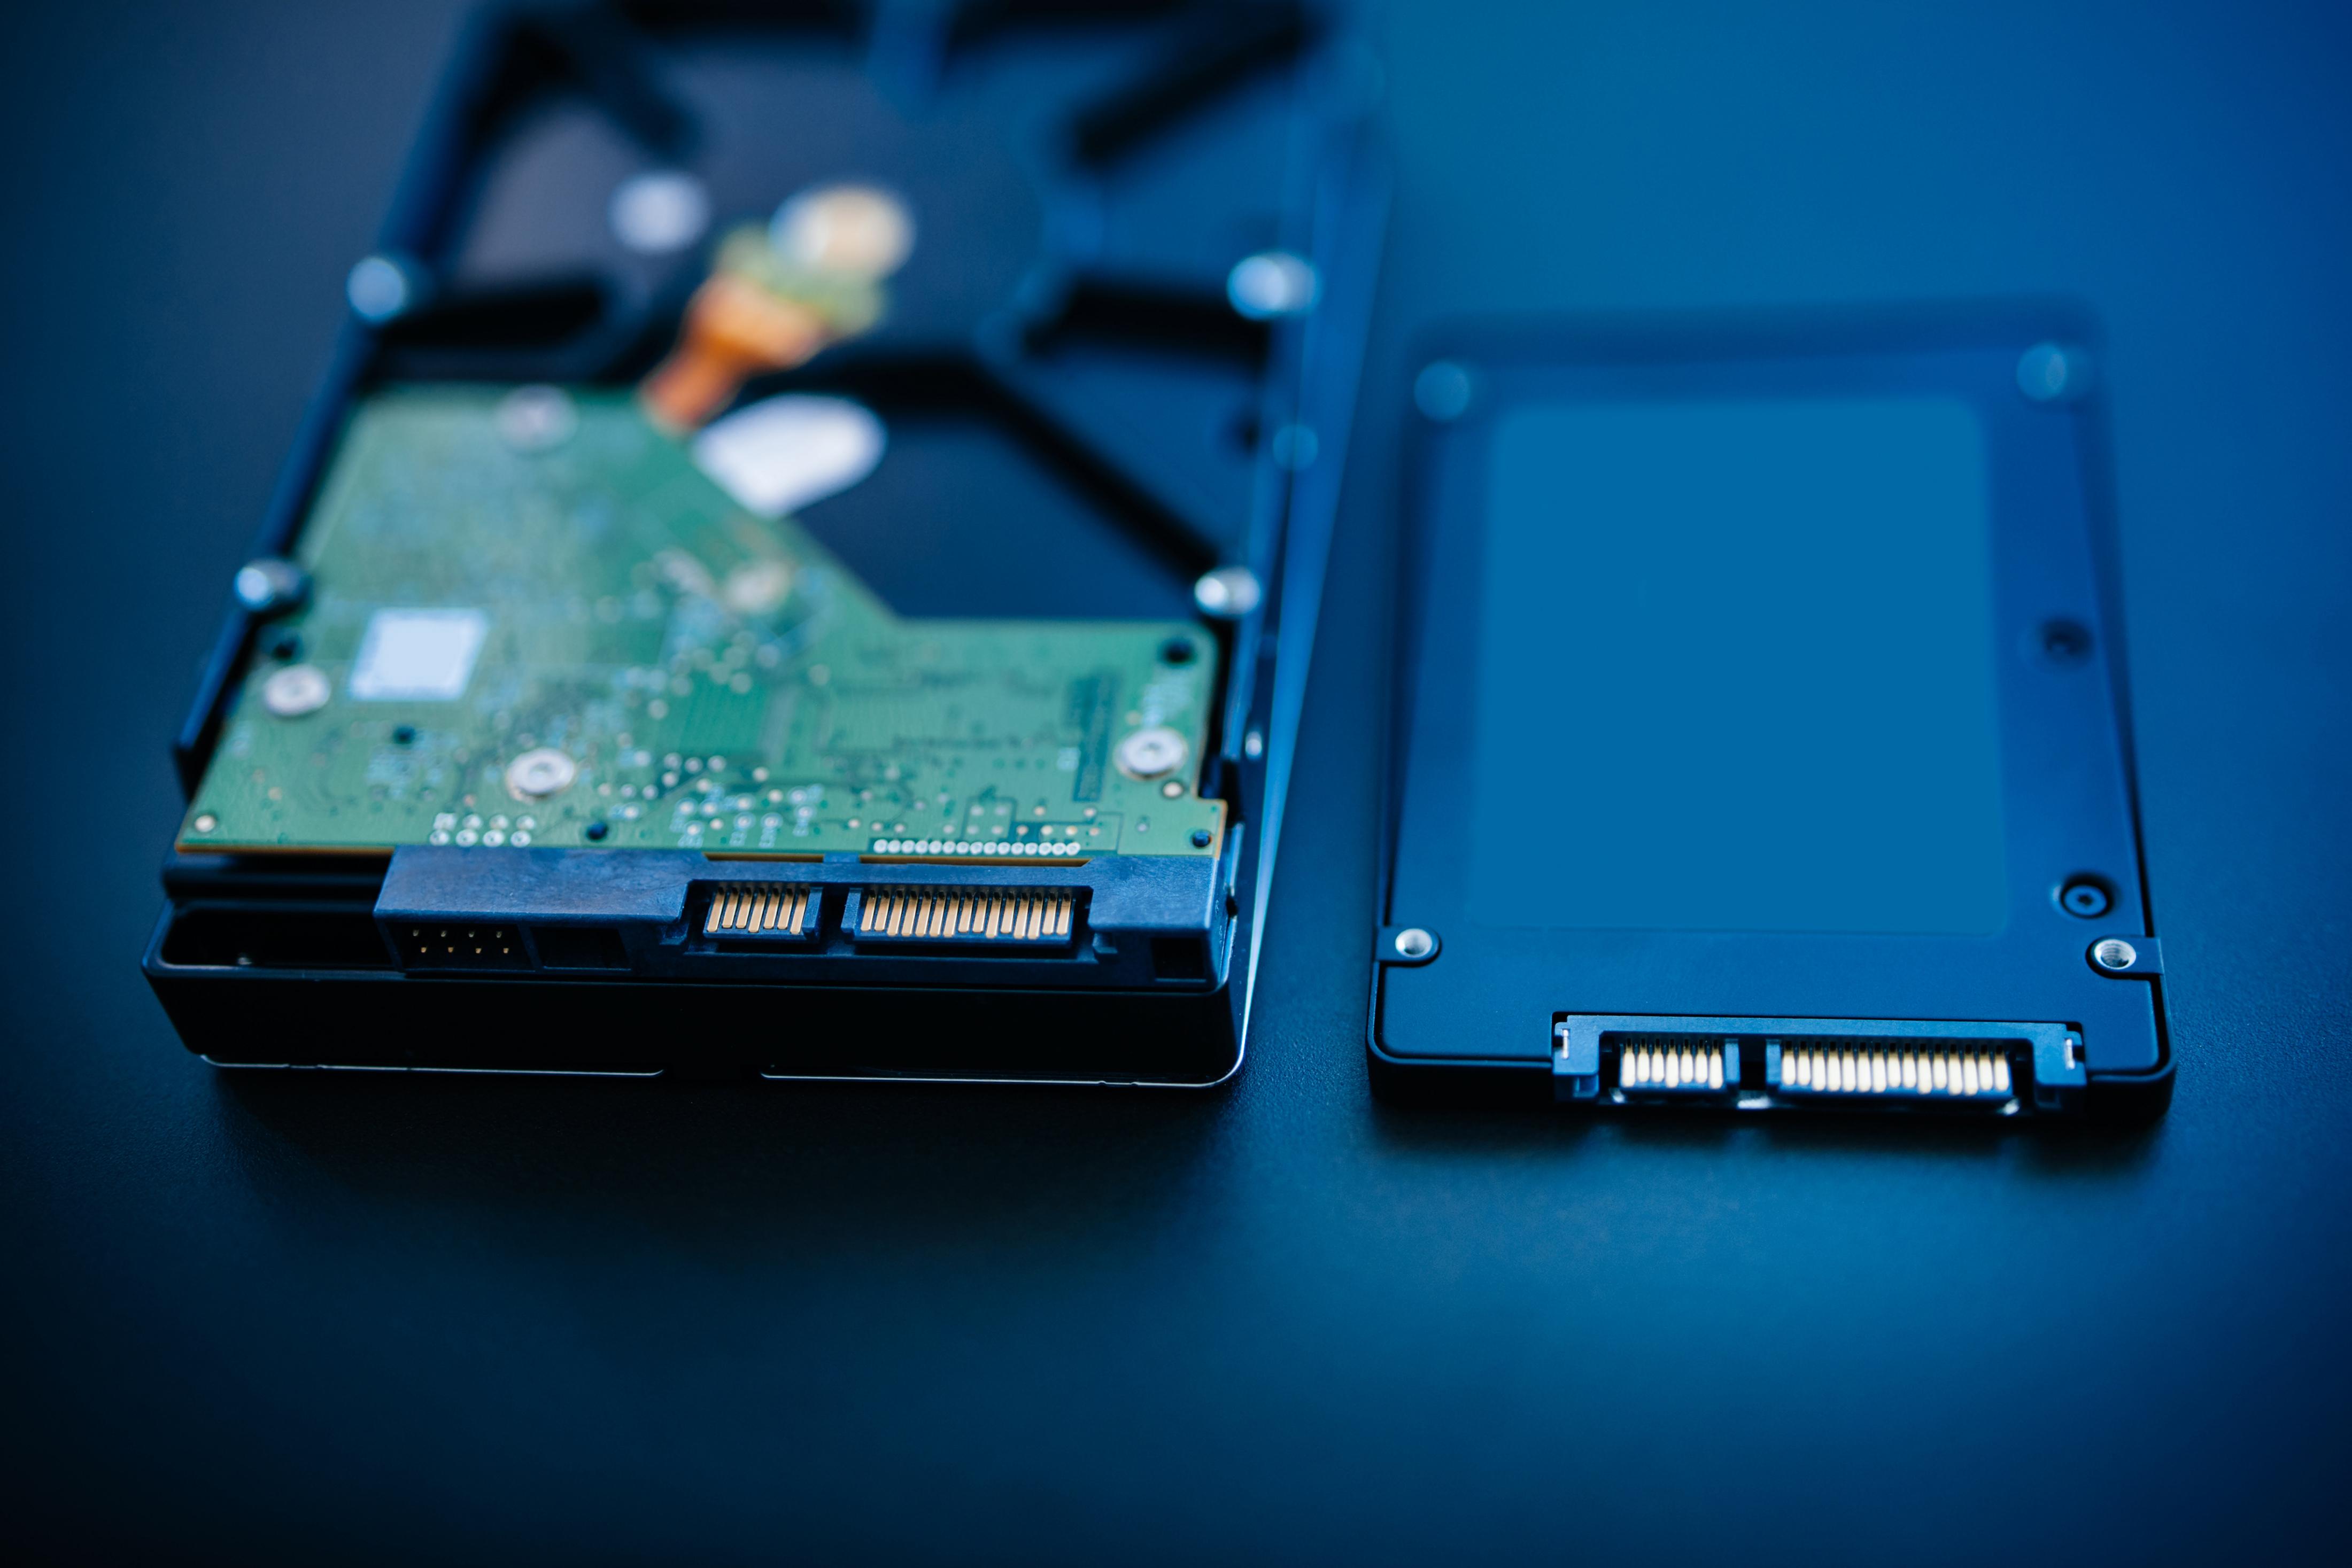 There’s a new reason HDDs could be better than SSDs